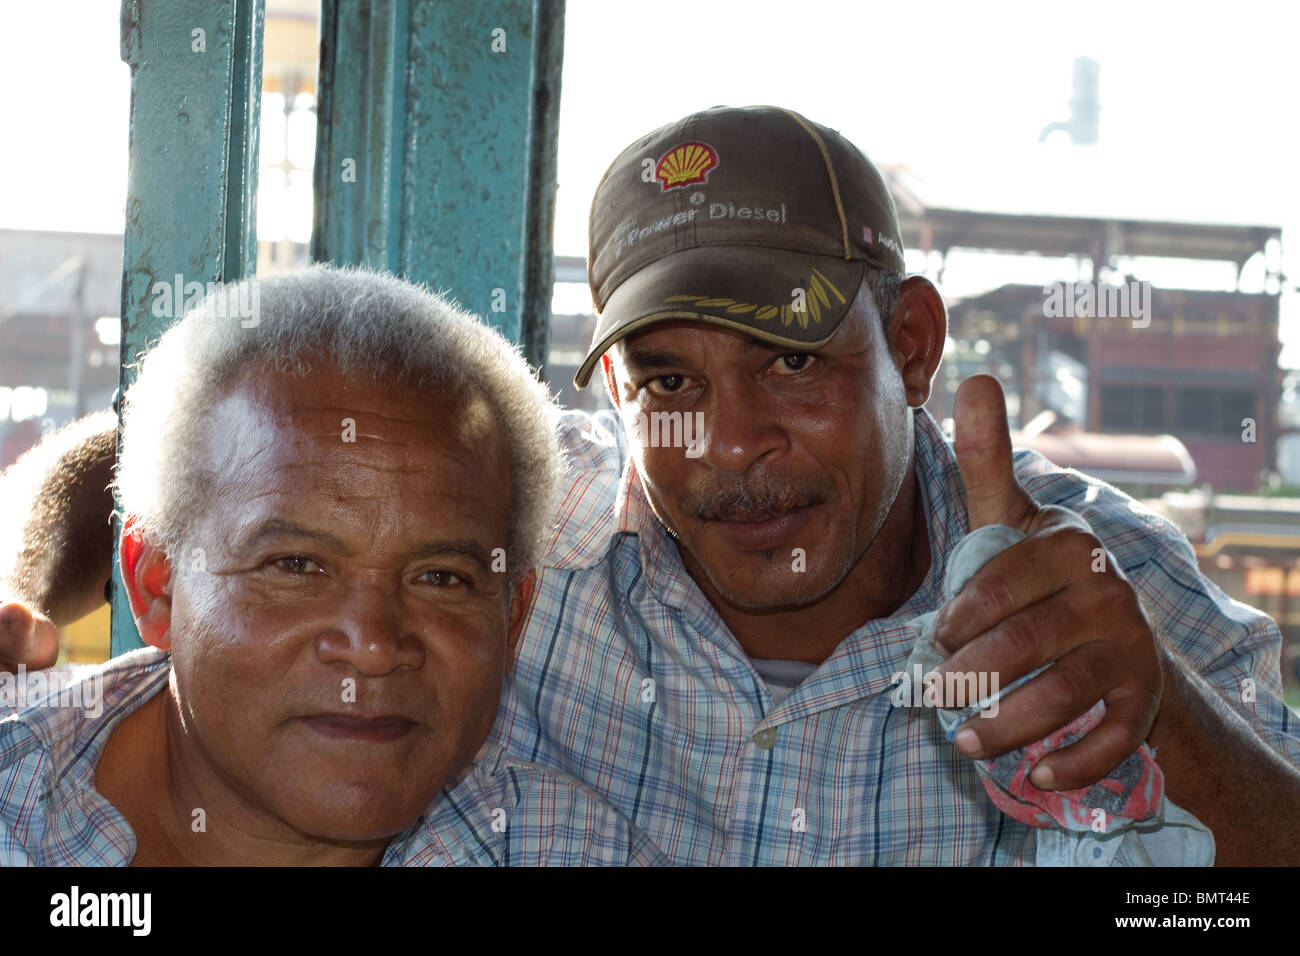 Two Cuban Steam Locomotive Train Drivers Posing For A Photo In Their Steam Train Cab Stock Photo